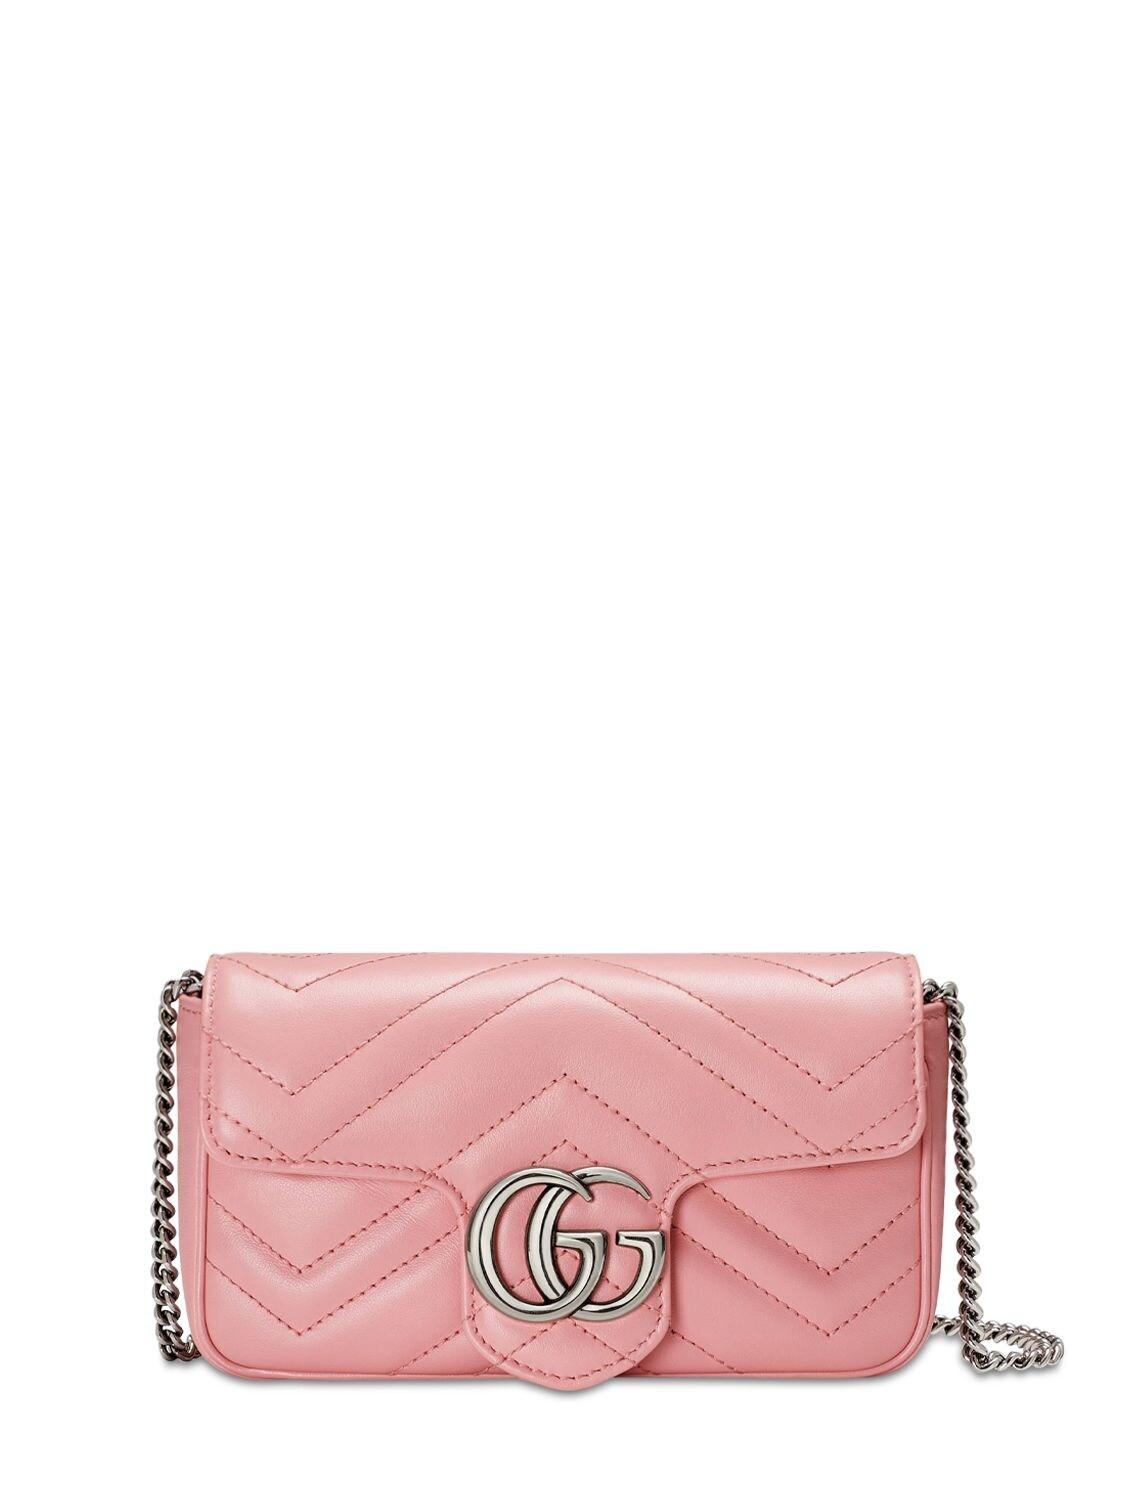 Gucci Super Mini Gg Marmont Leather Bag in Pink - Lyst